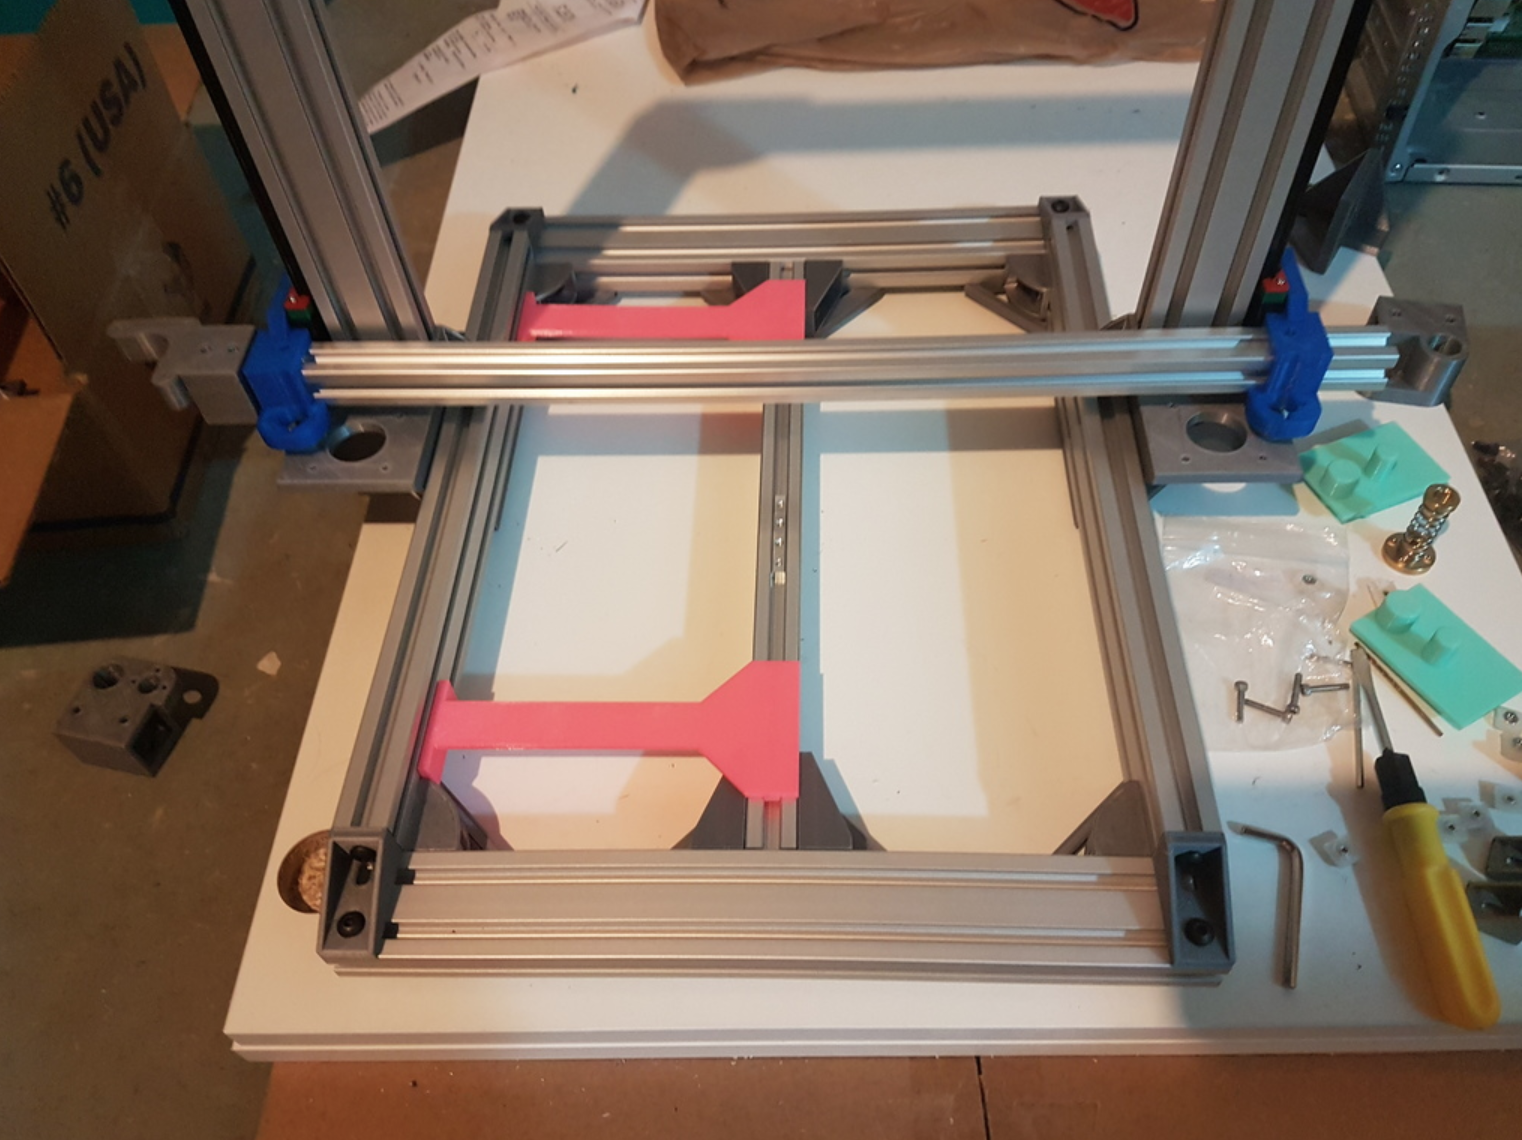 Capture d’écran 2017-10-16 à 14.17.10.png Download free STL file Anet AM8 Y-axis 2020 alignment tool • 3D print template, Mikeyup